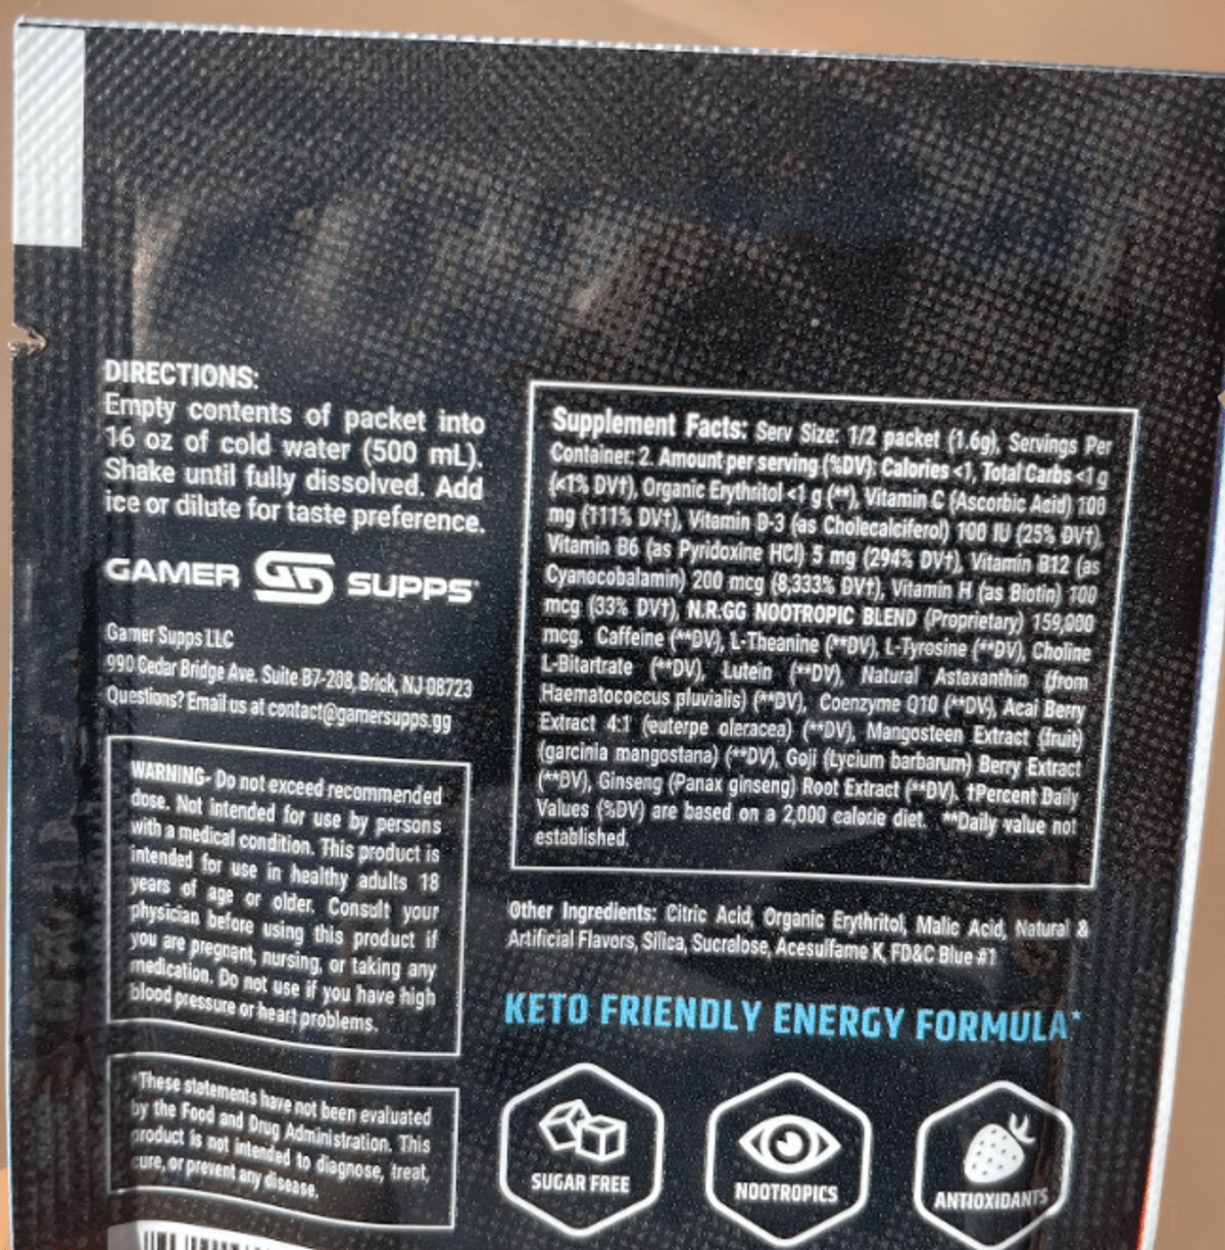 Nutrition facts of GG Energy Drink.